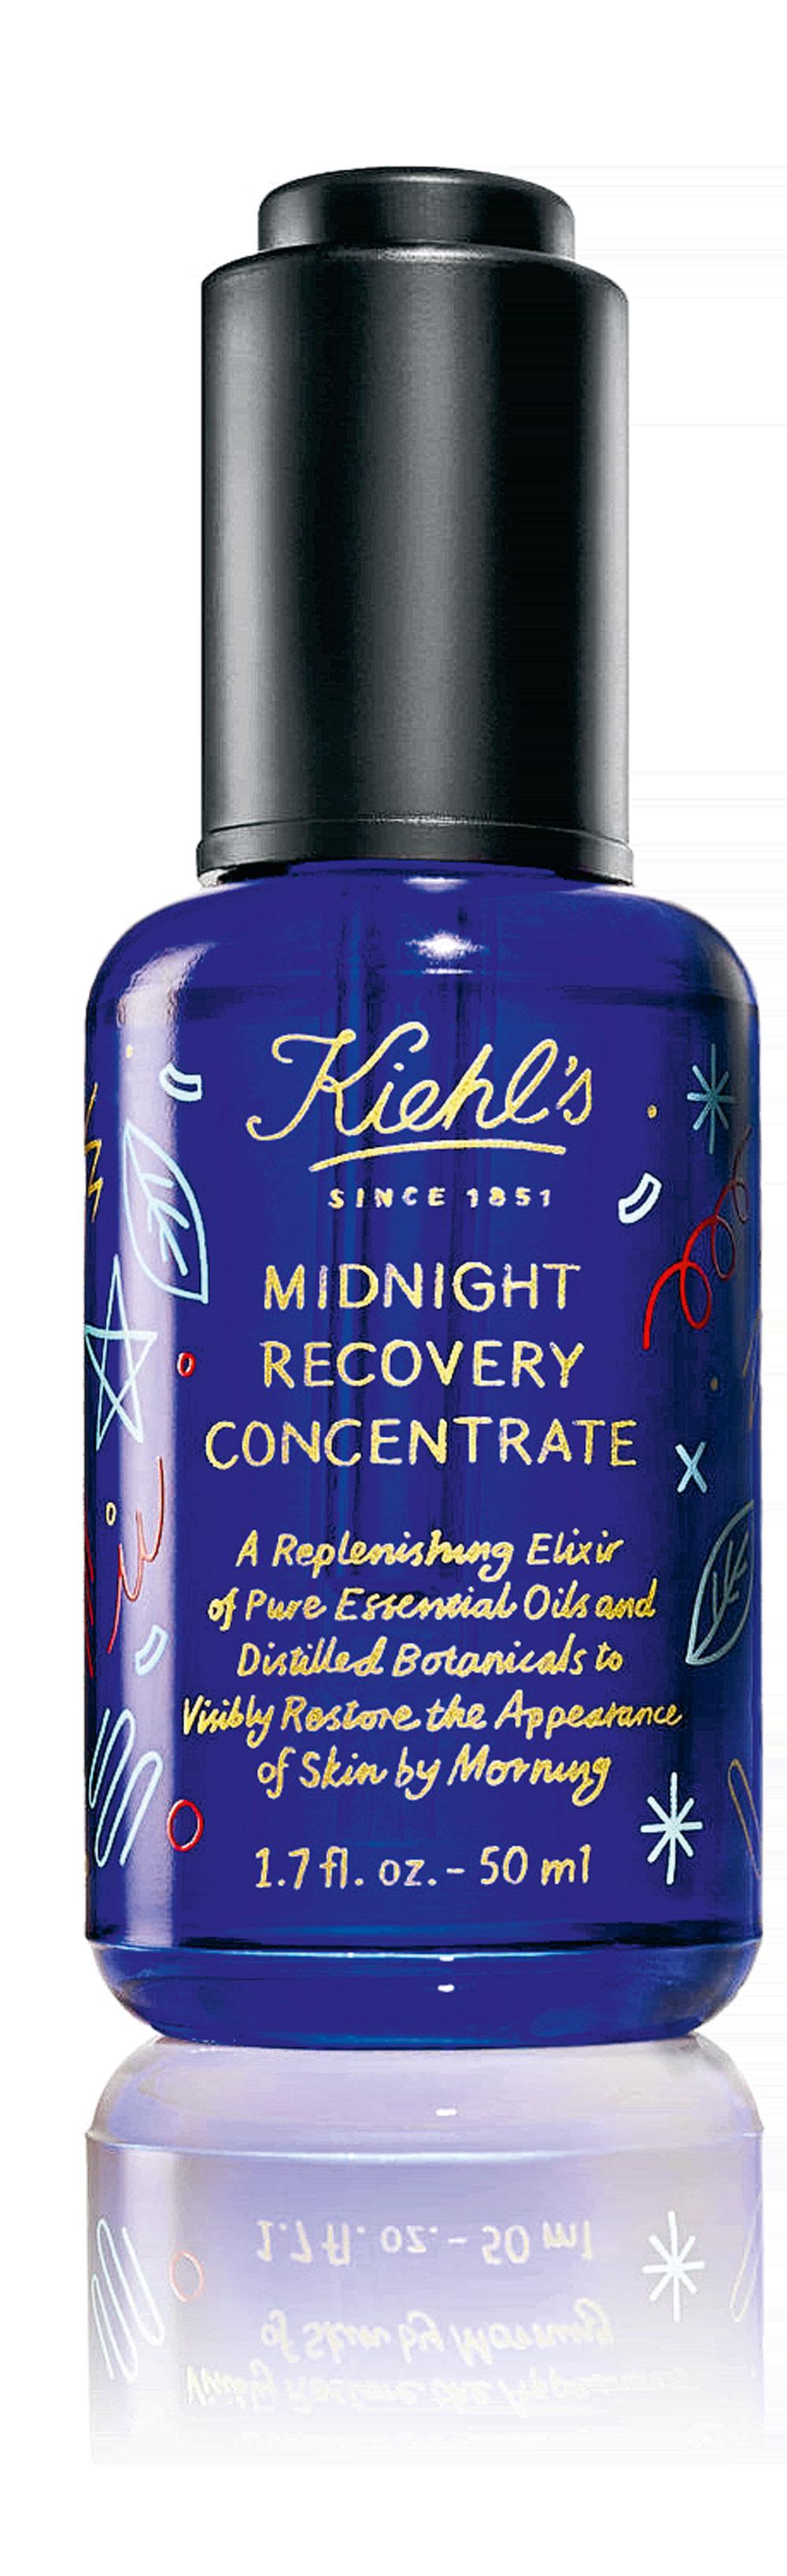 Un soin visage Midnight Recovery Concentrate, Kiehl's, 64 euros les 50 ml.